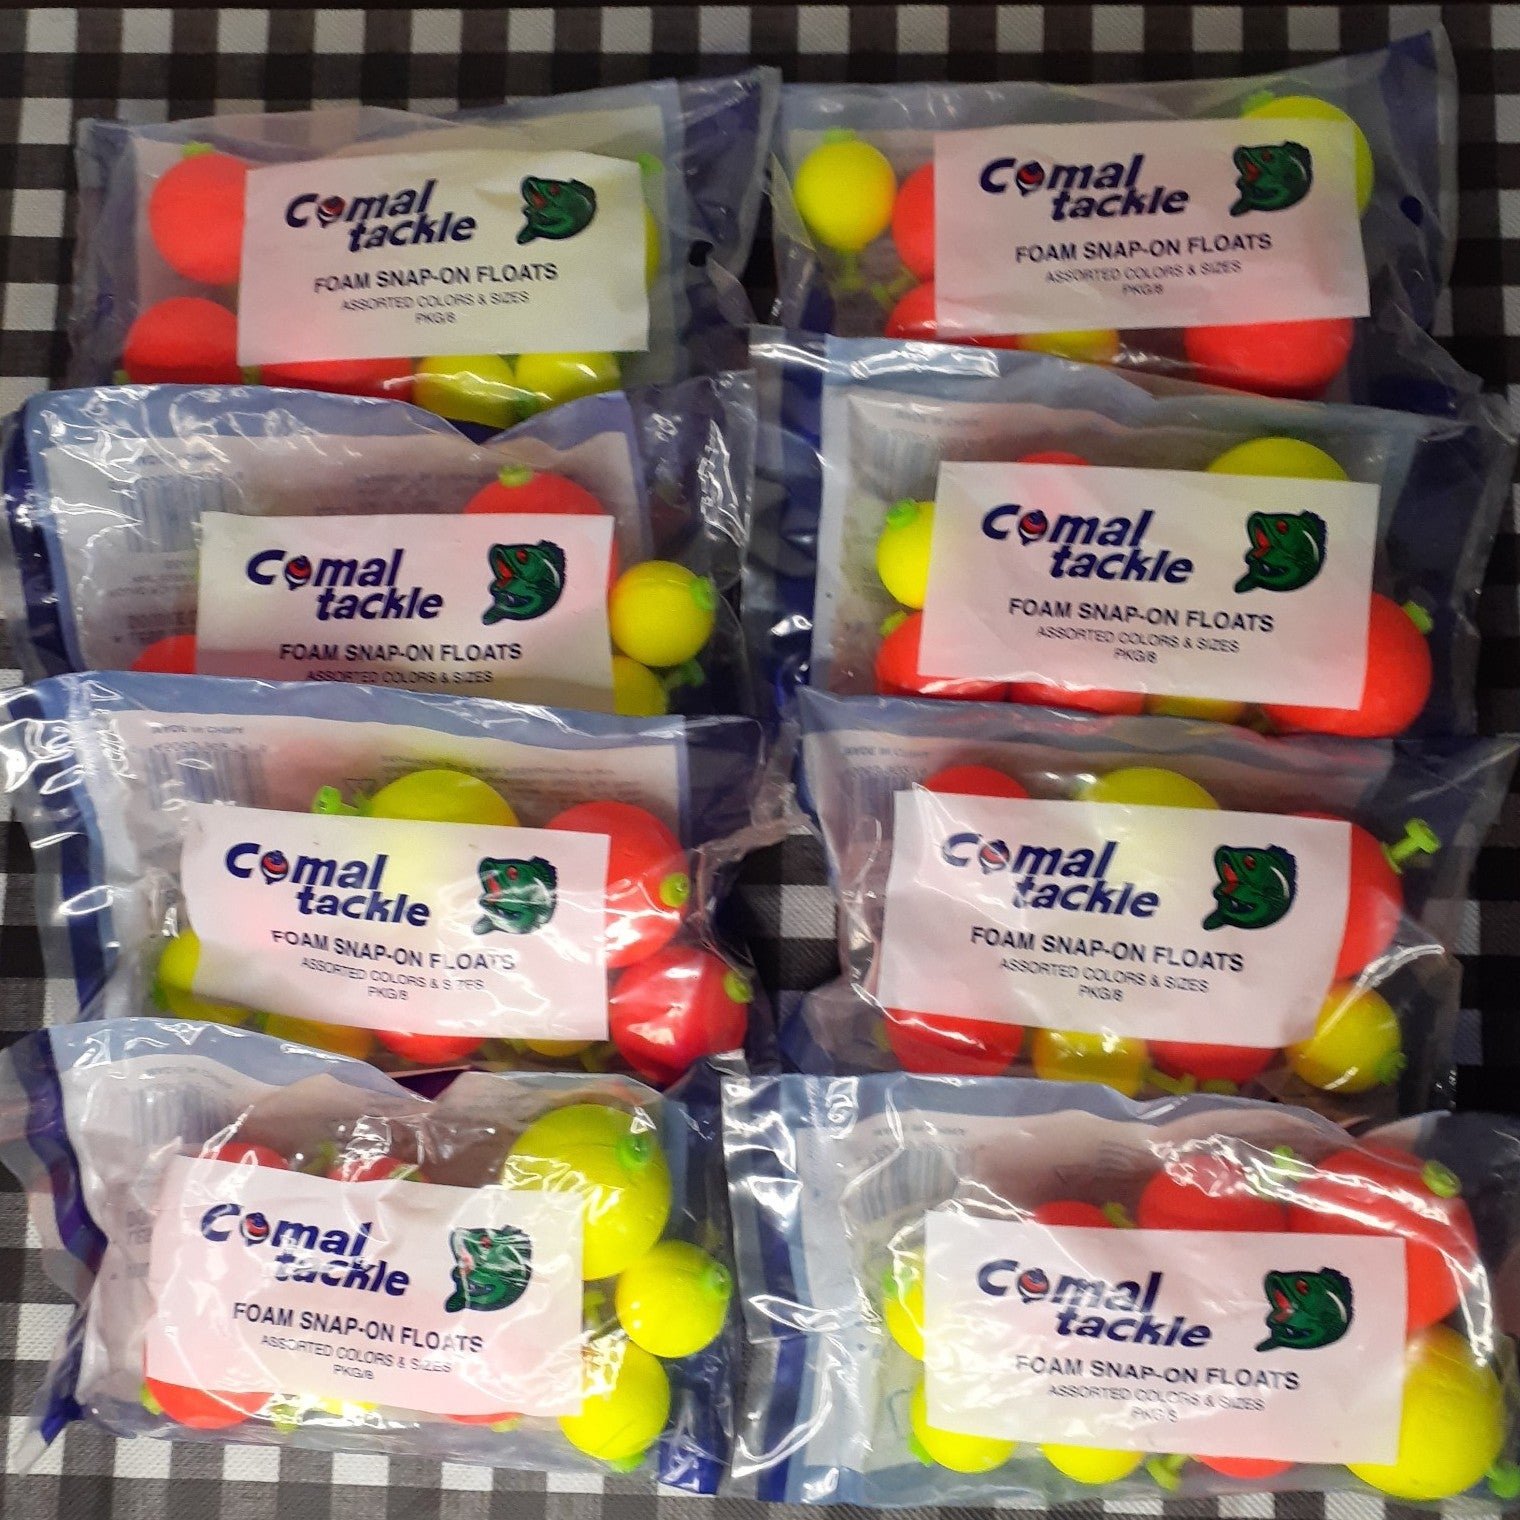 Lot of Comal Tackle Assorted Unbreakable Foam Snap on Floats Bobbers Fishing mLbqNcsa9